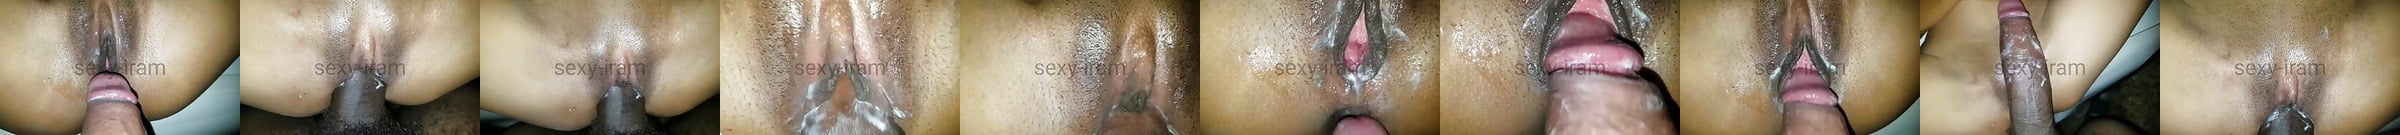 My Wife Fuck Black Guy Front Of Me In Hotel Free Porn Fe